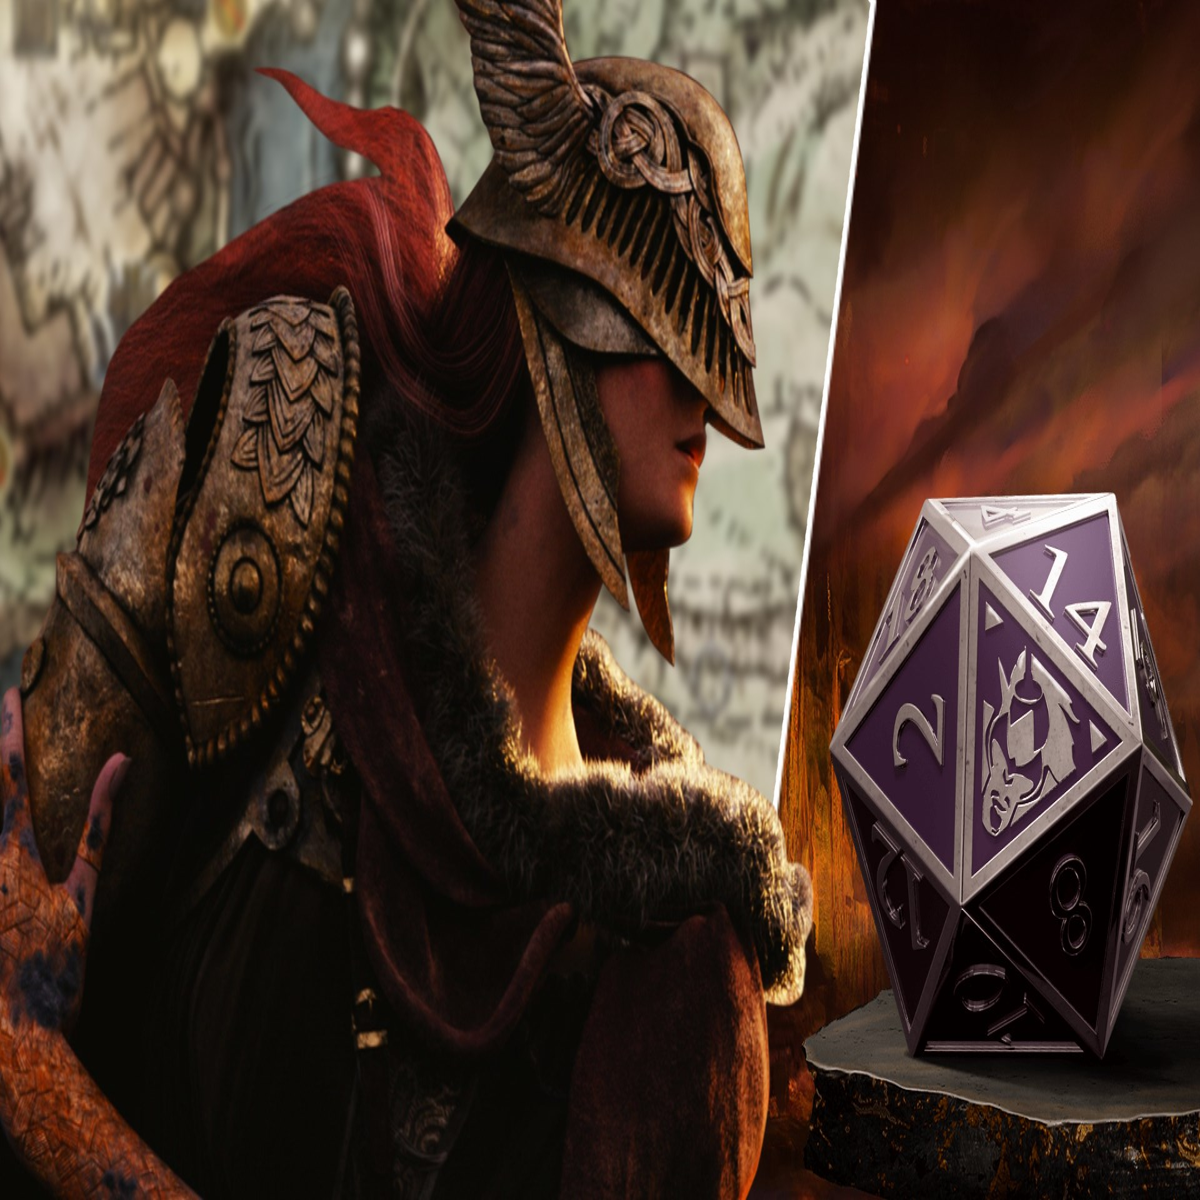 New Exciting Information Has Surfaced About Elden Ring Maker